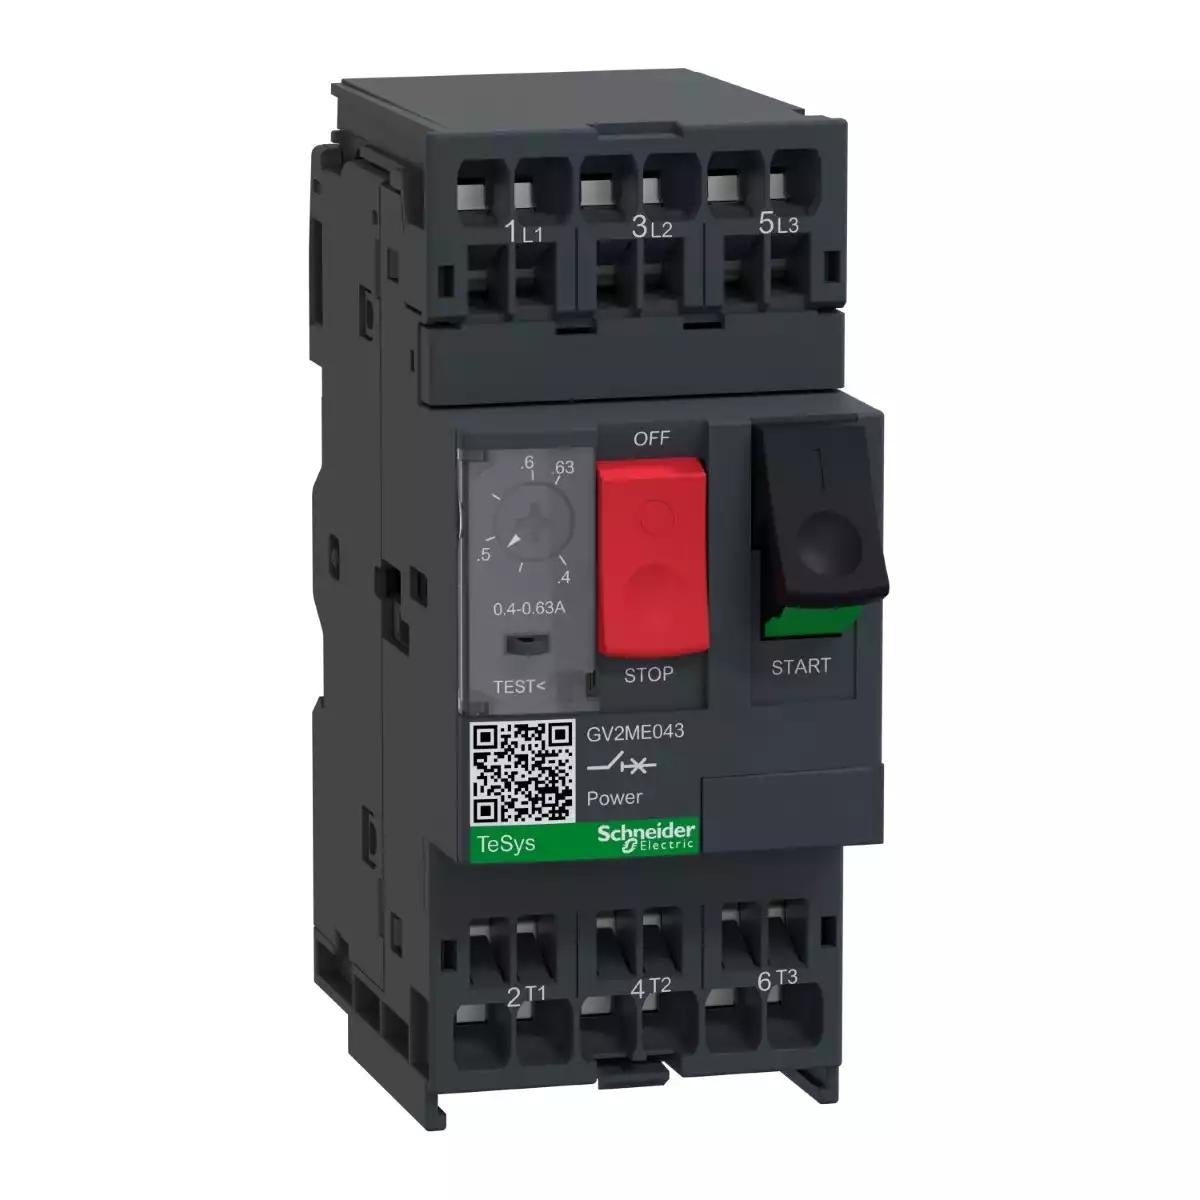 Motor circuit breaker,TeSys Deca frame 2,3P,0.4-0.63A,thermal magnetic,push button,spring terminals